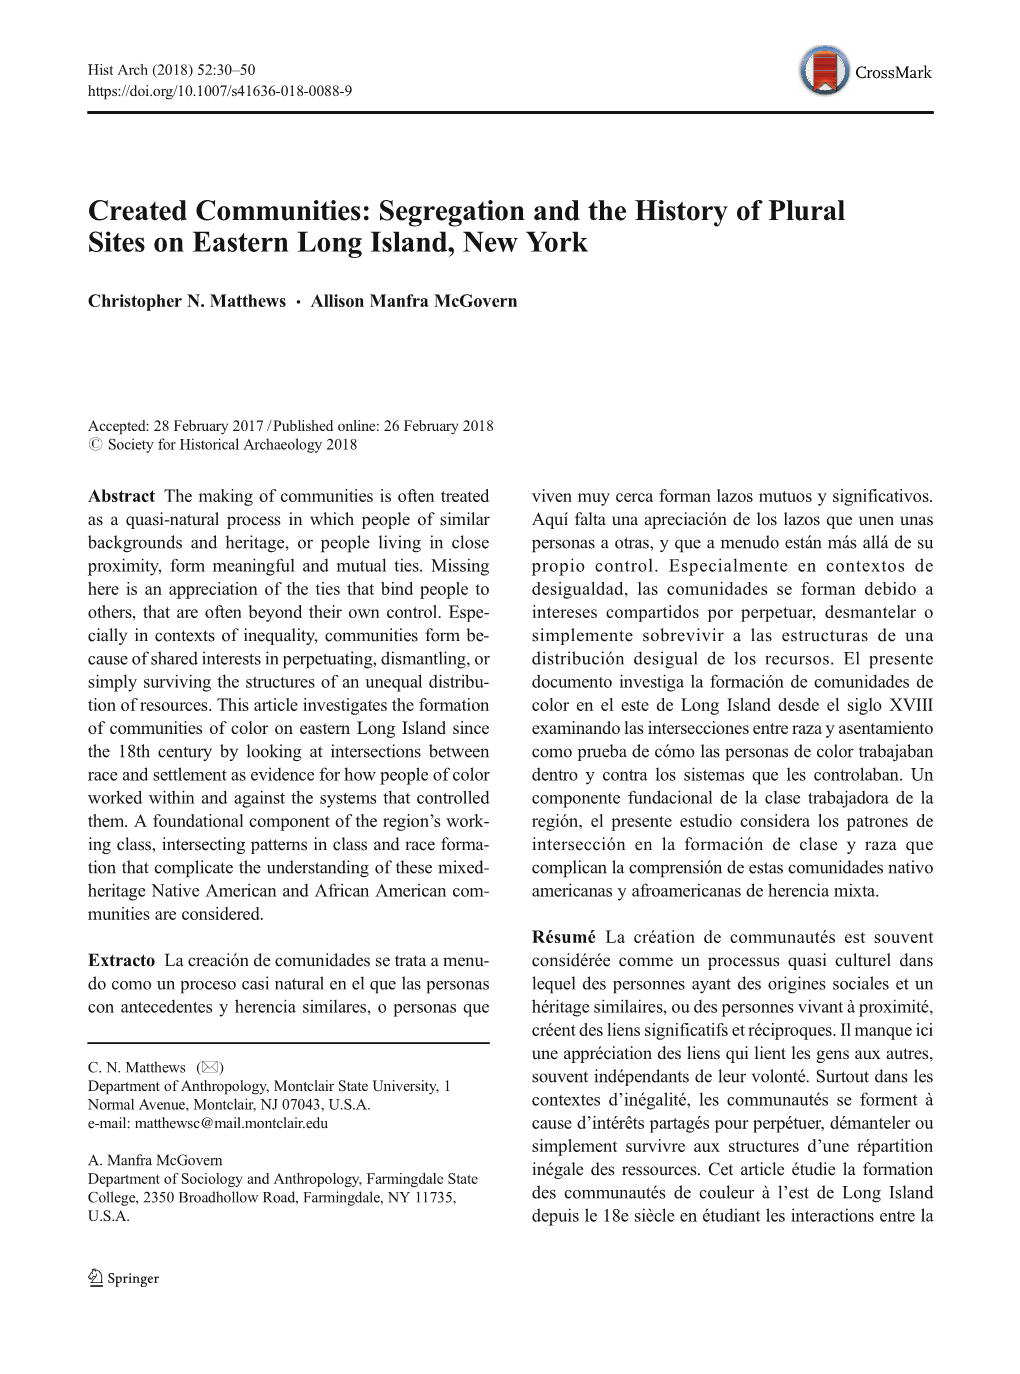 Created Communities: Segregation and the History of Plural Sites on Eastern Long Island, New York